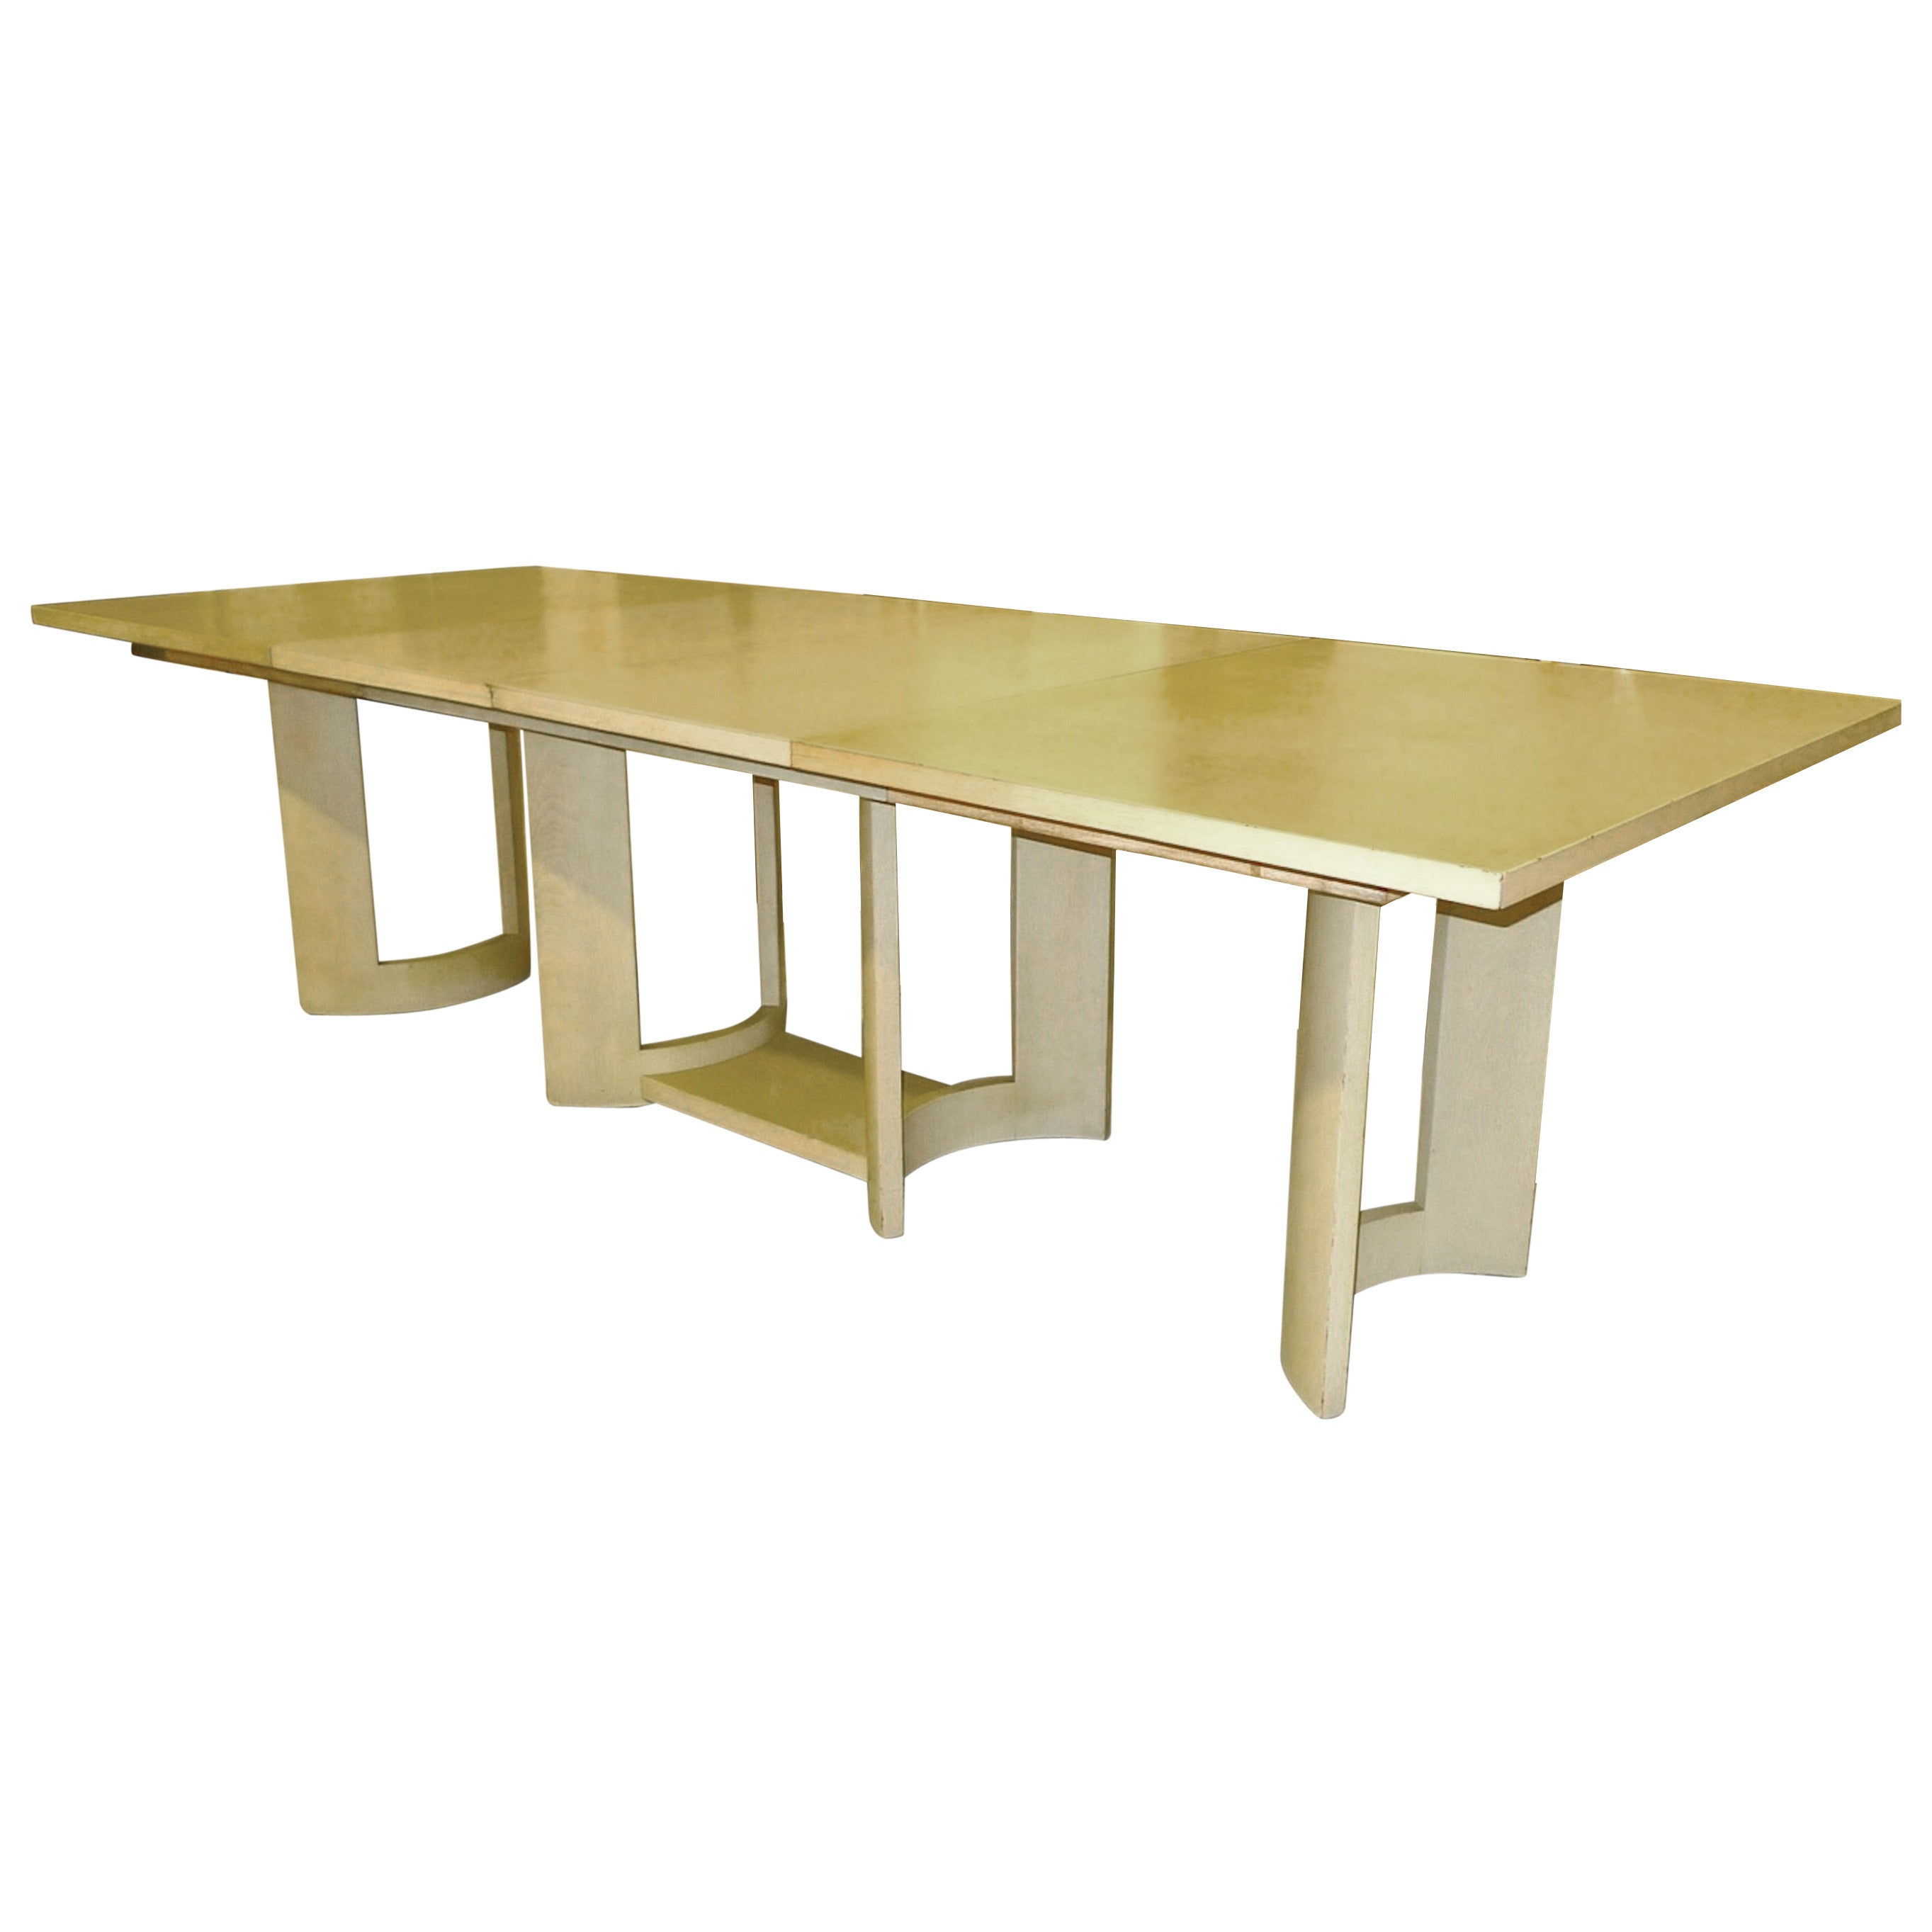 Virginia Conner for Grosfeld House Parquet-Top Dining Table